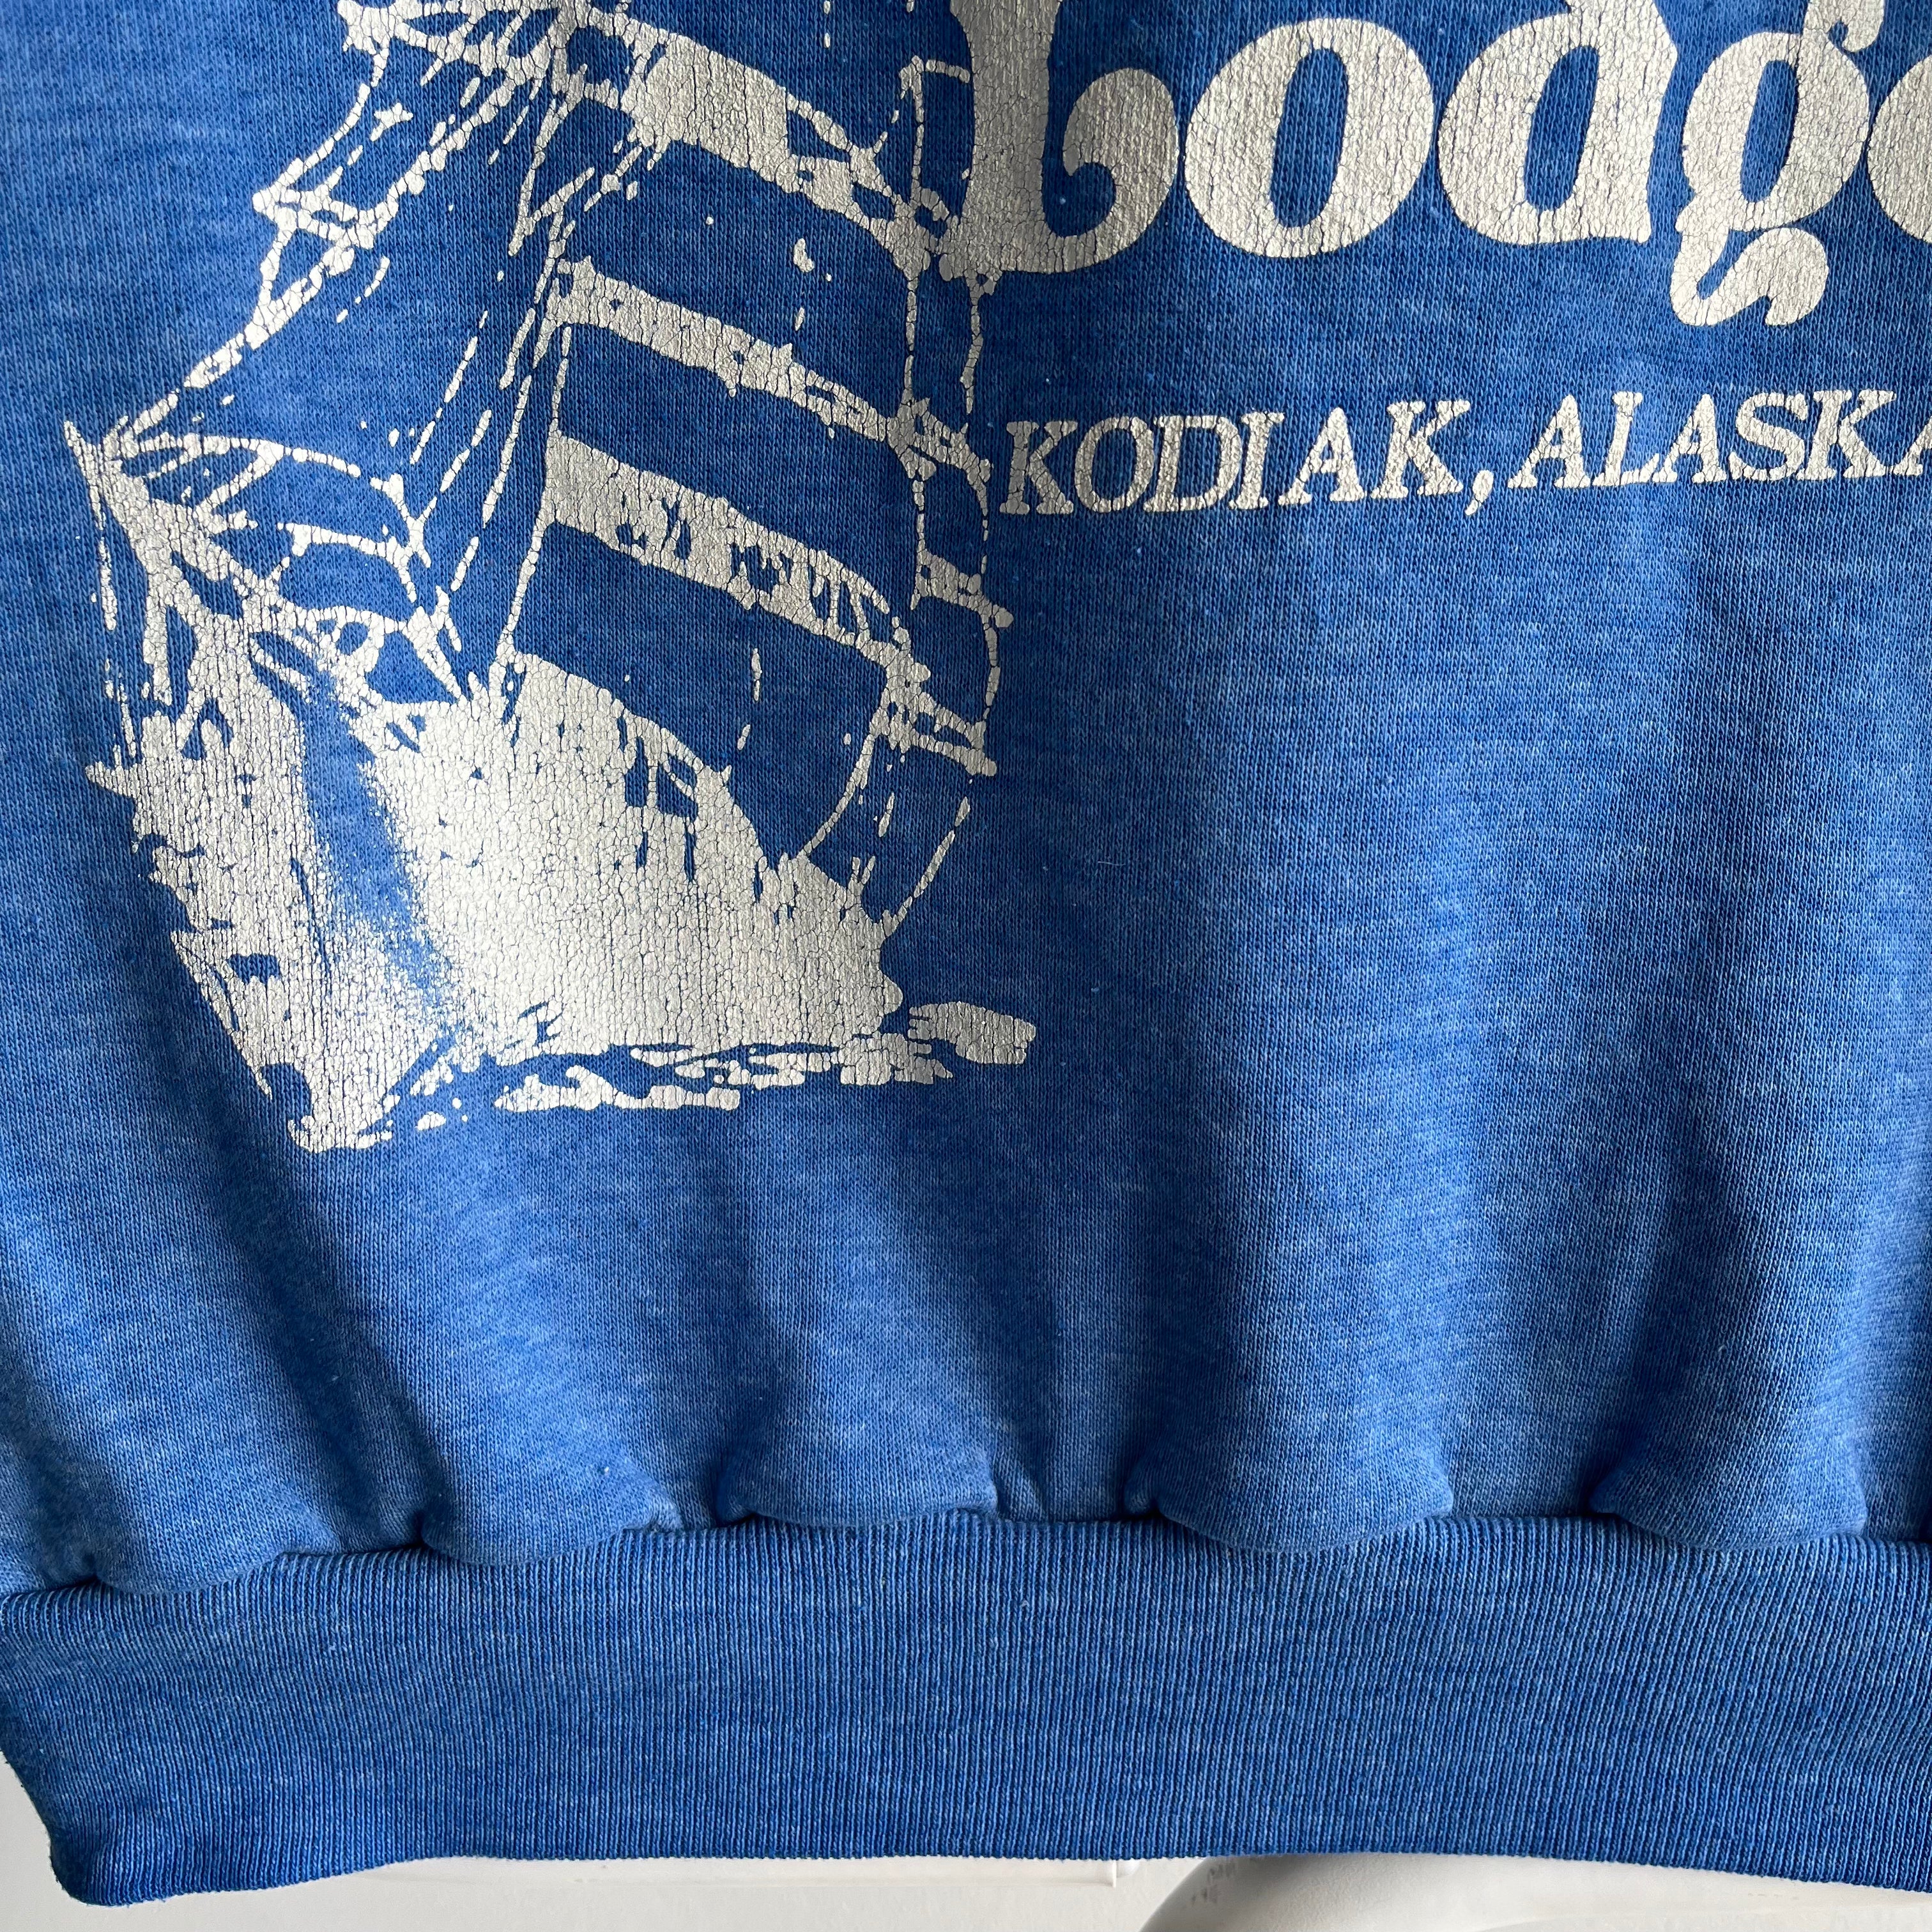 1970s End of the Iditarod Trail - Nome, Alaska - Front and Back Cut Sleeve Sweatshirt